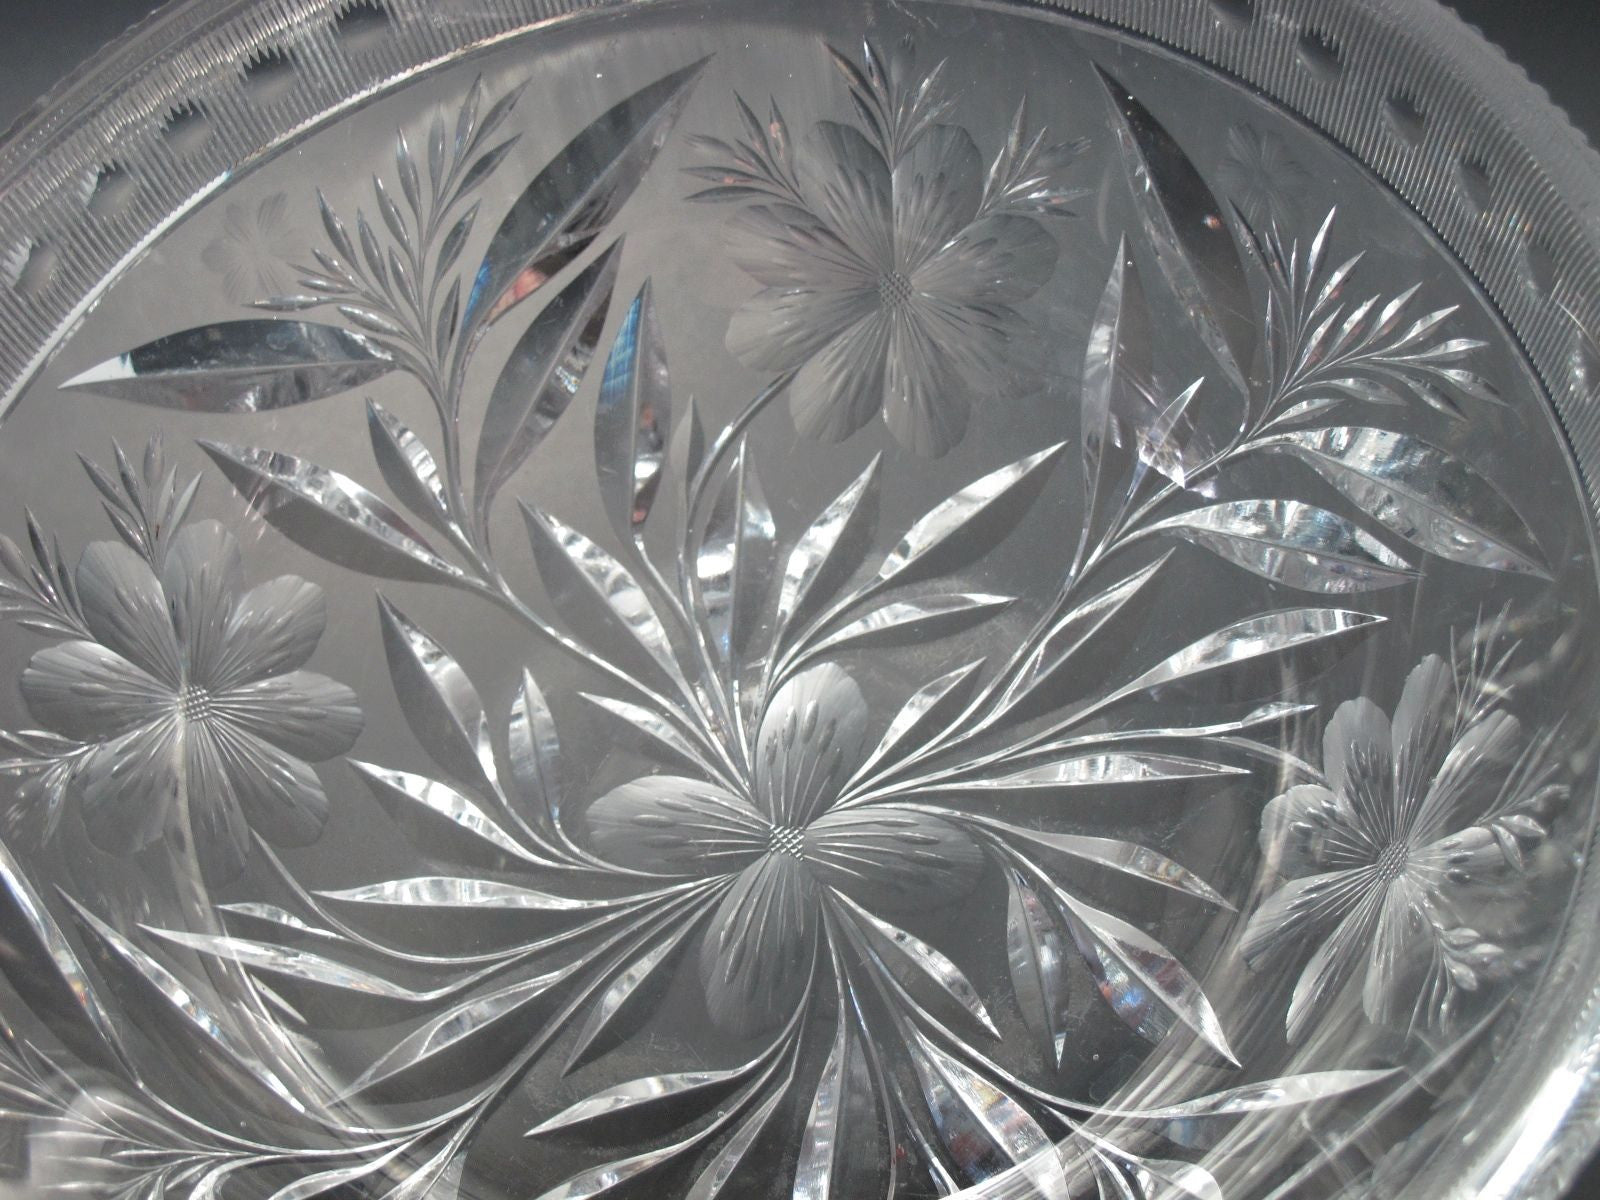 American Brilliant Period Cut Glass bowl  ABP  Antique Floral WHEEL CUT - O'Rourke crystal awards & gifts abp cut glass